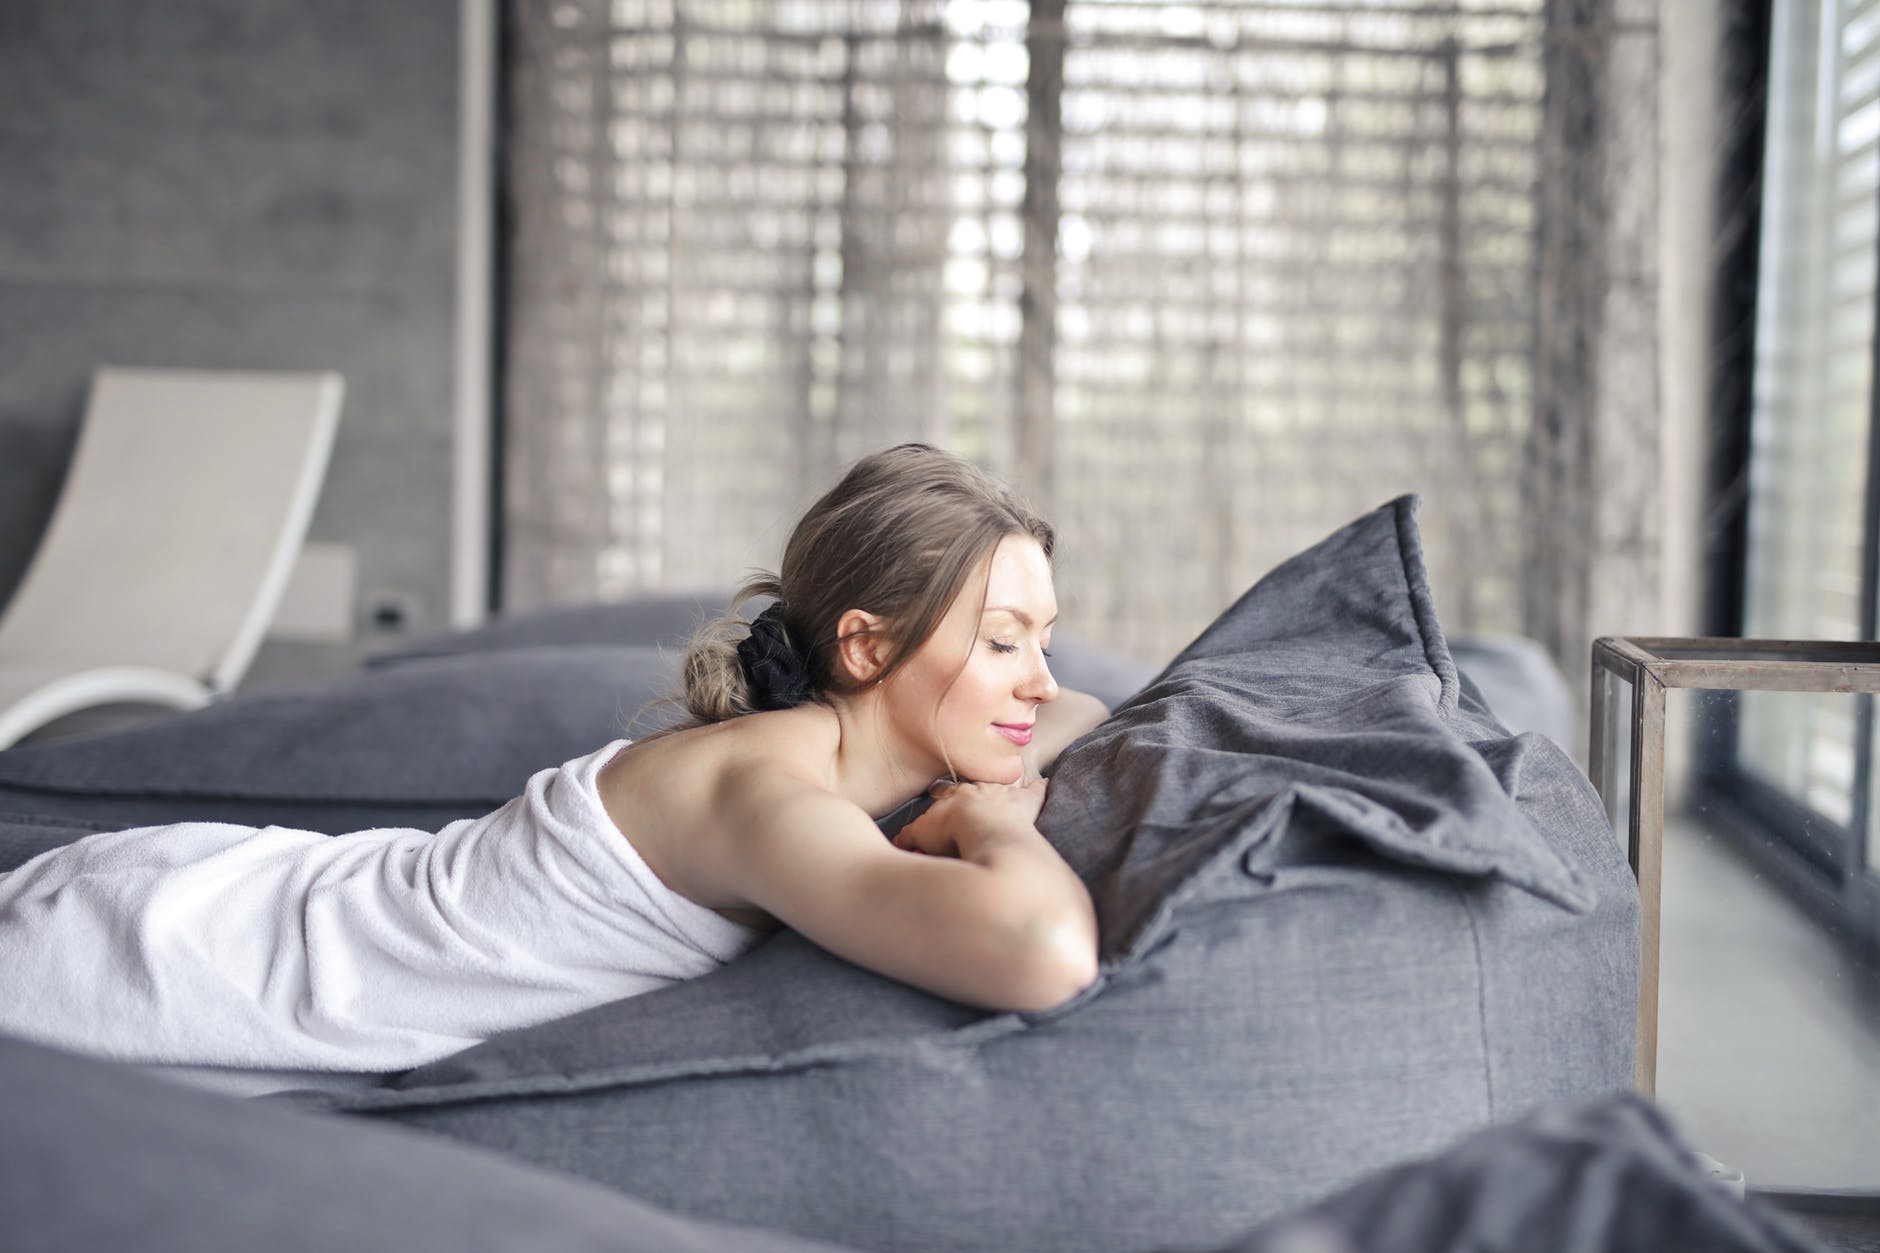 woman in white tank top lying on gray bed introvert spirituality mental health anxiety mindfulness tips introversion peace meditation meditate focus emotions emotional quiet self care relax relaxing